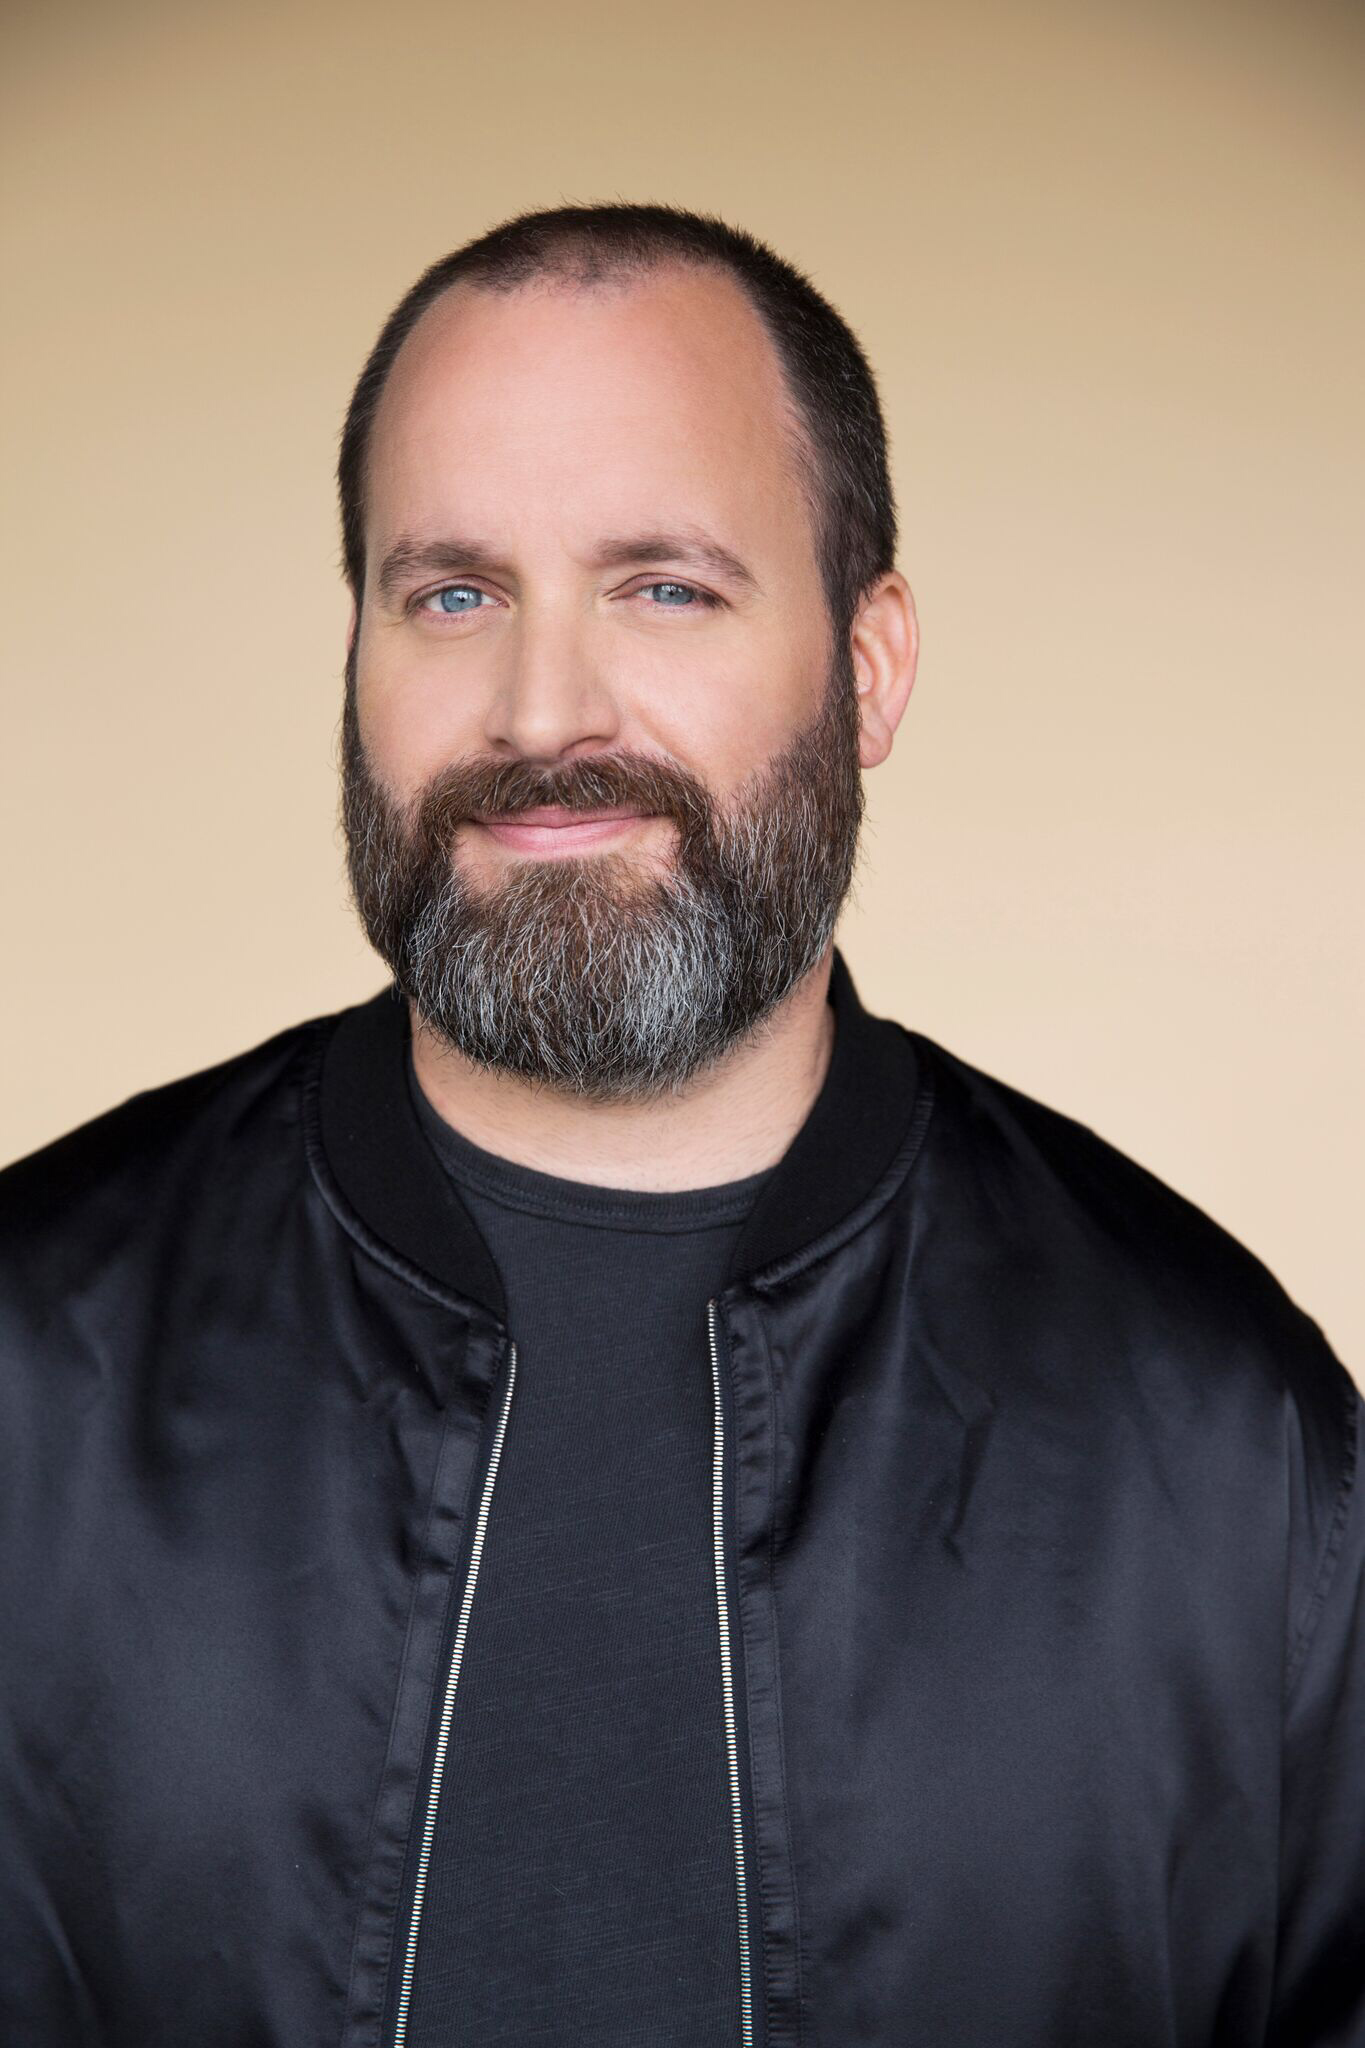 Tom Segura is ready to test new material at soldout Spokane Comedy